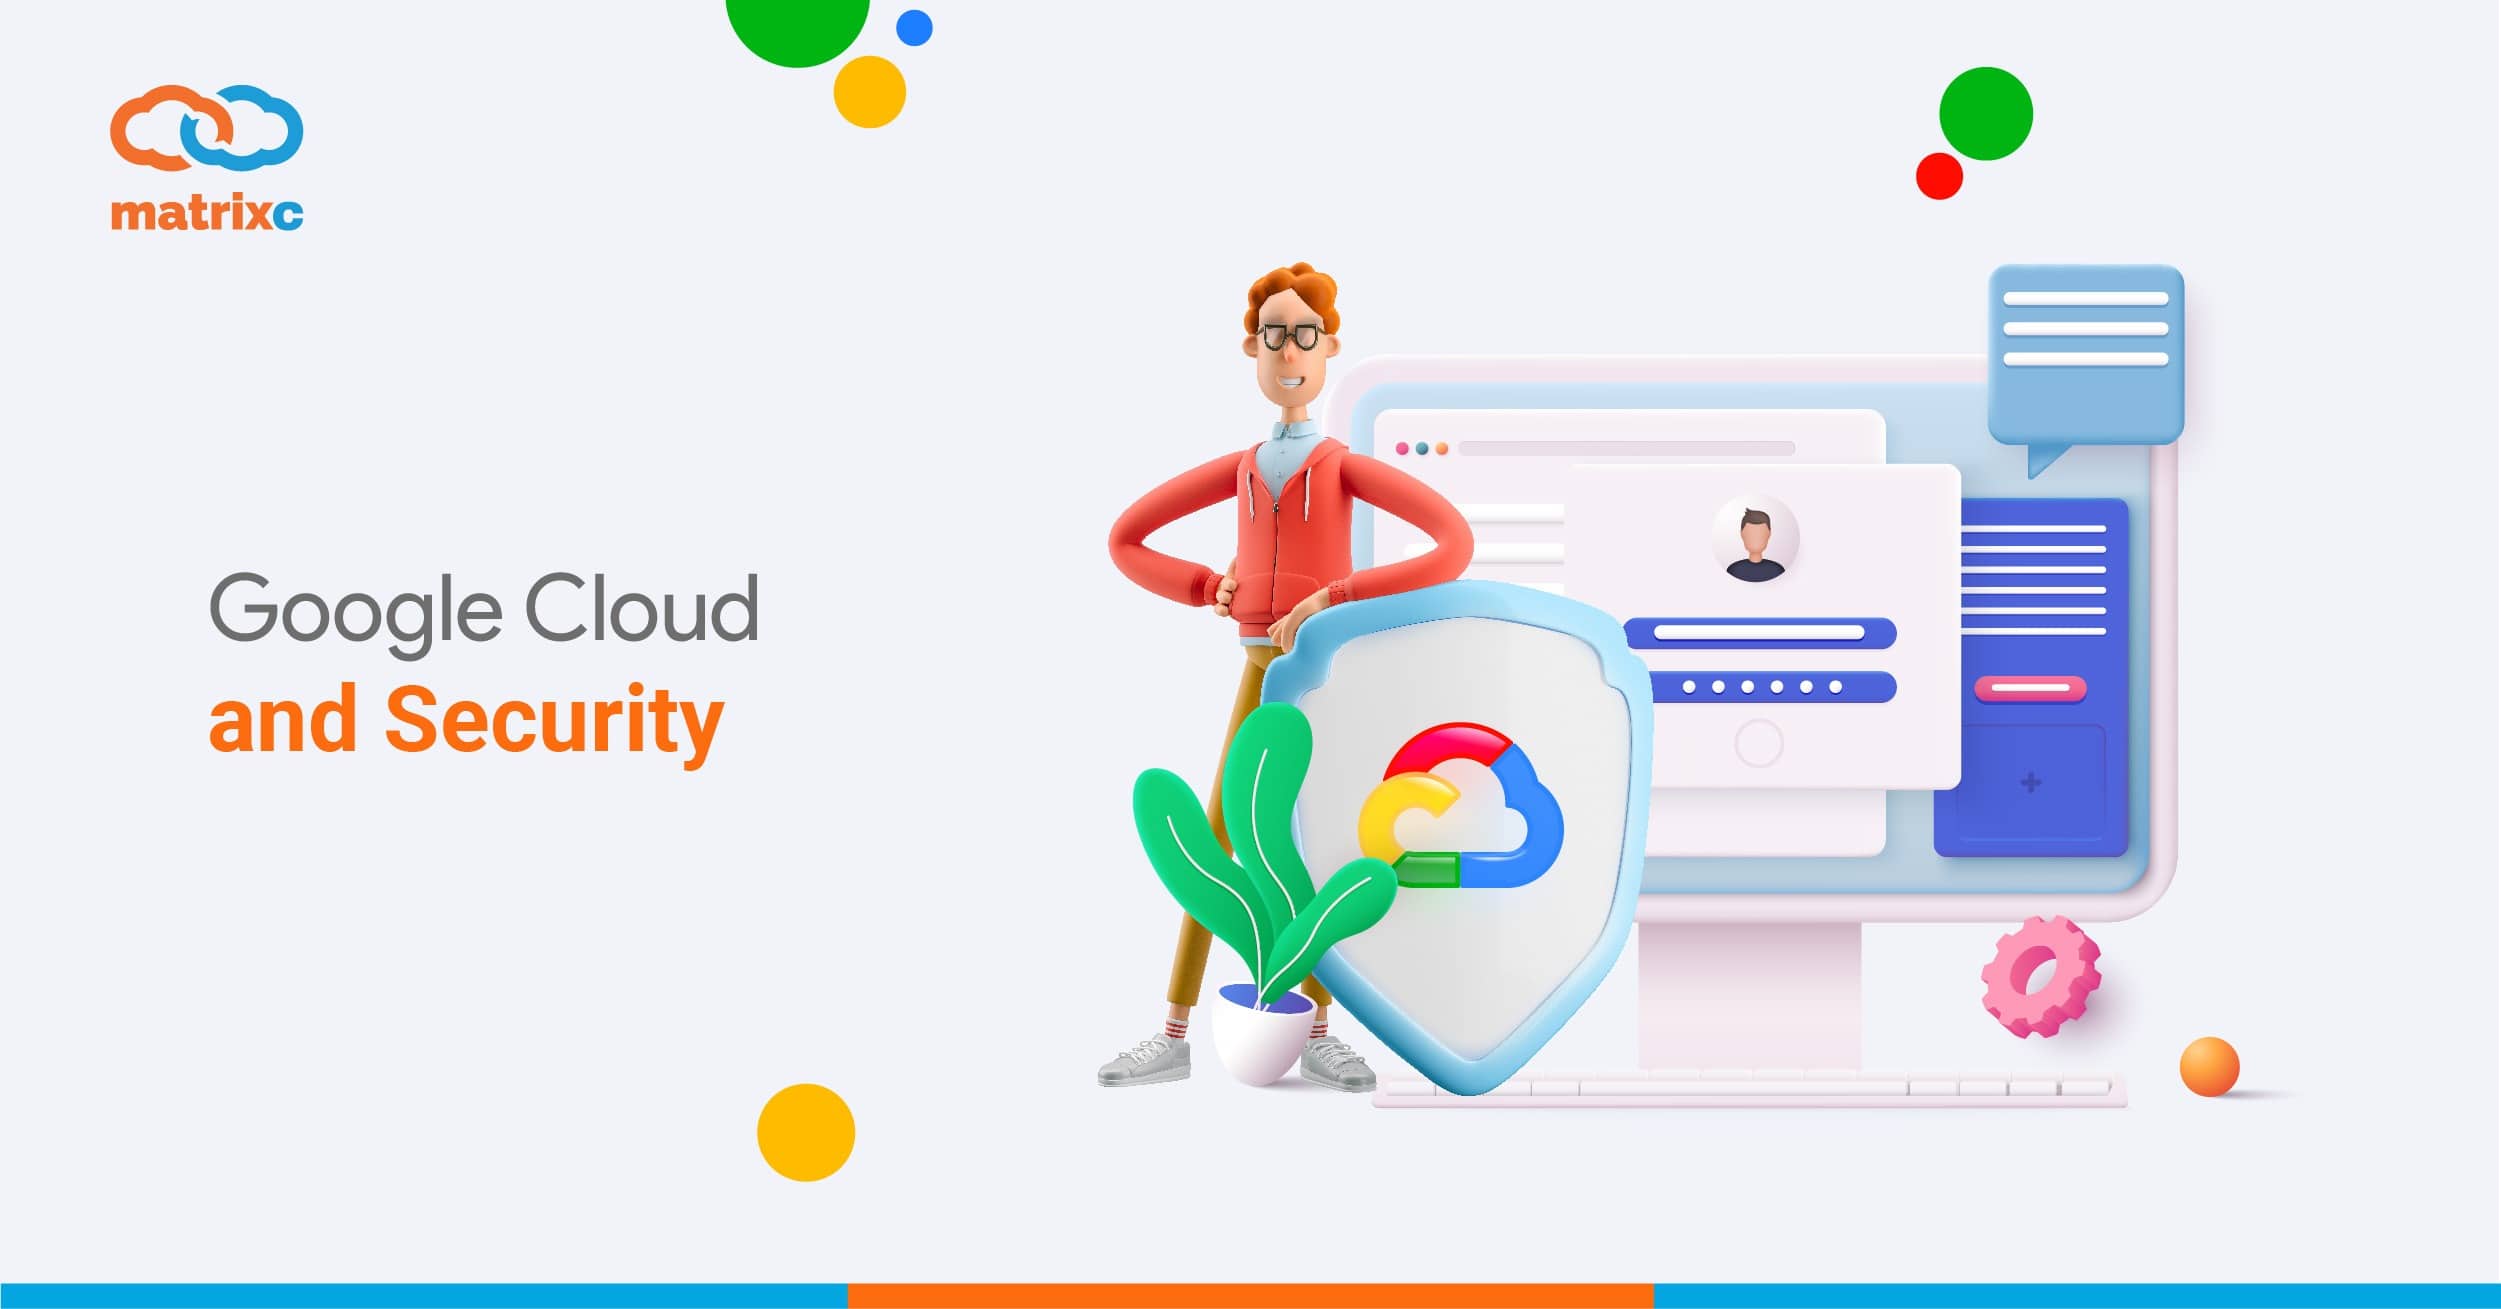 Google Cloud and Security